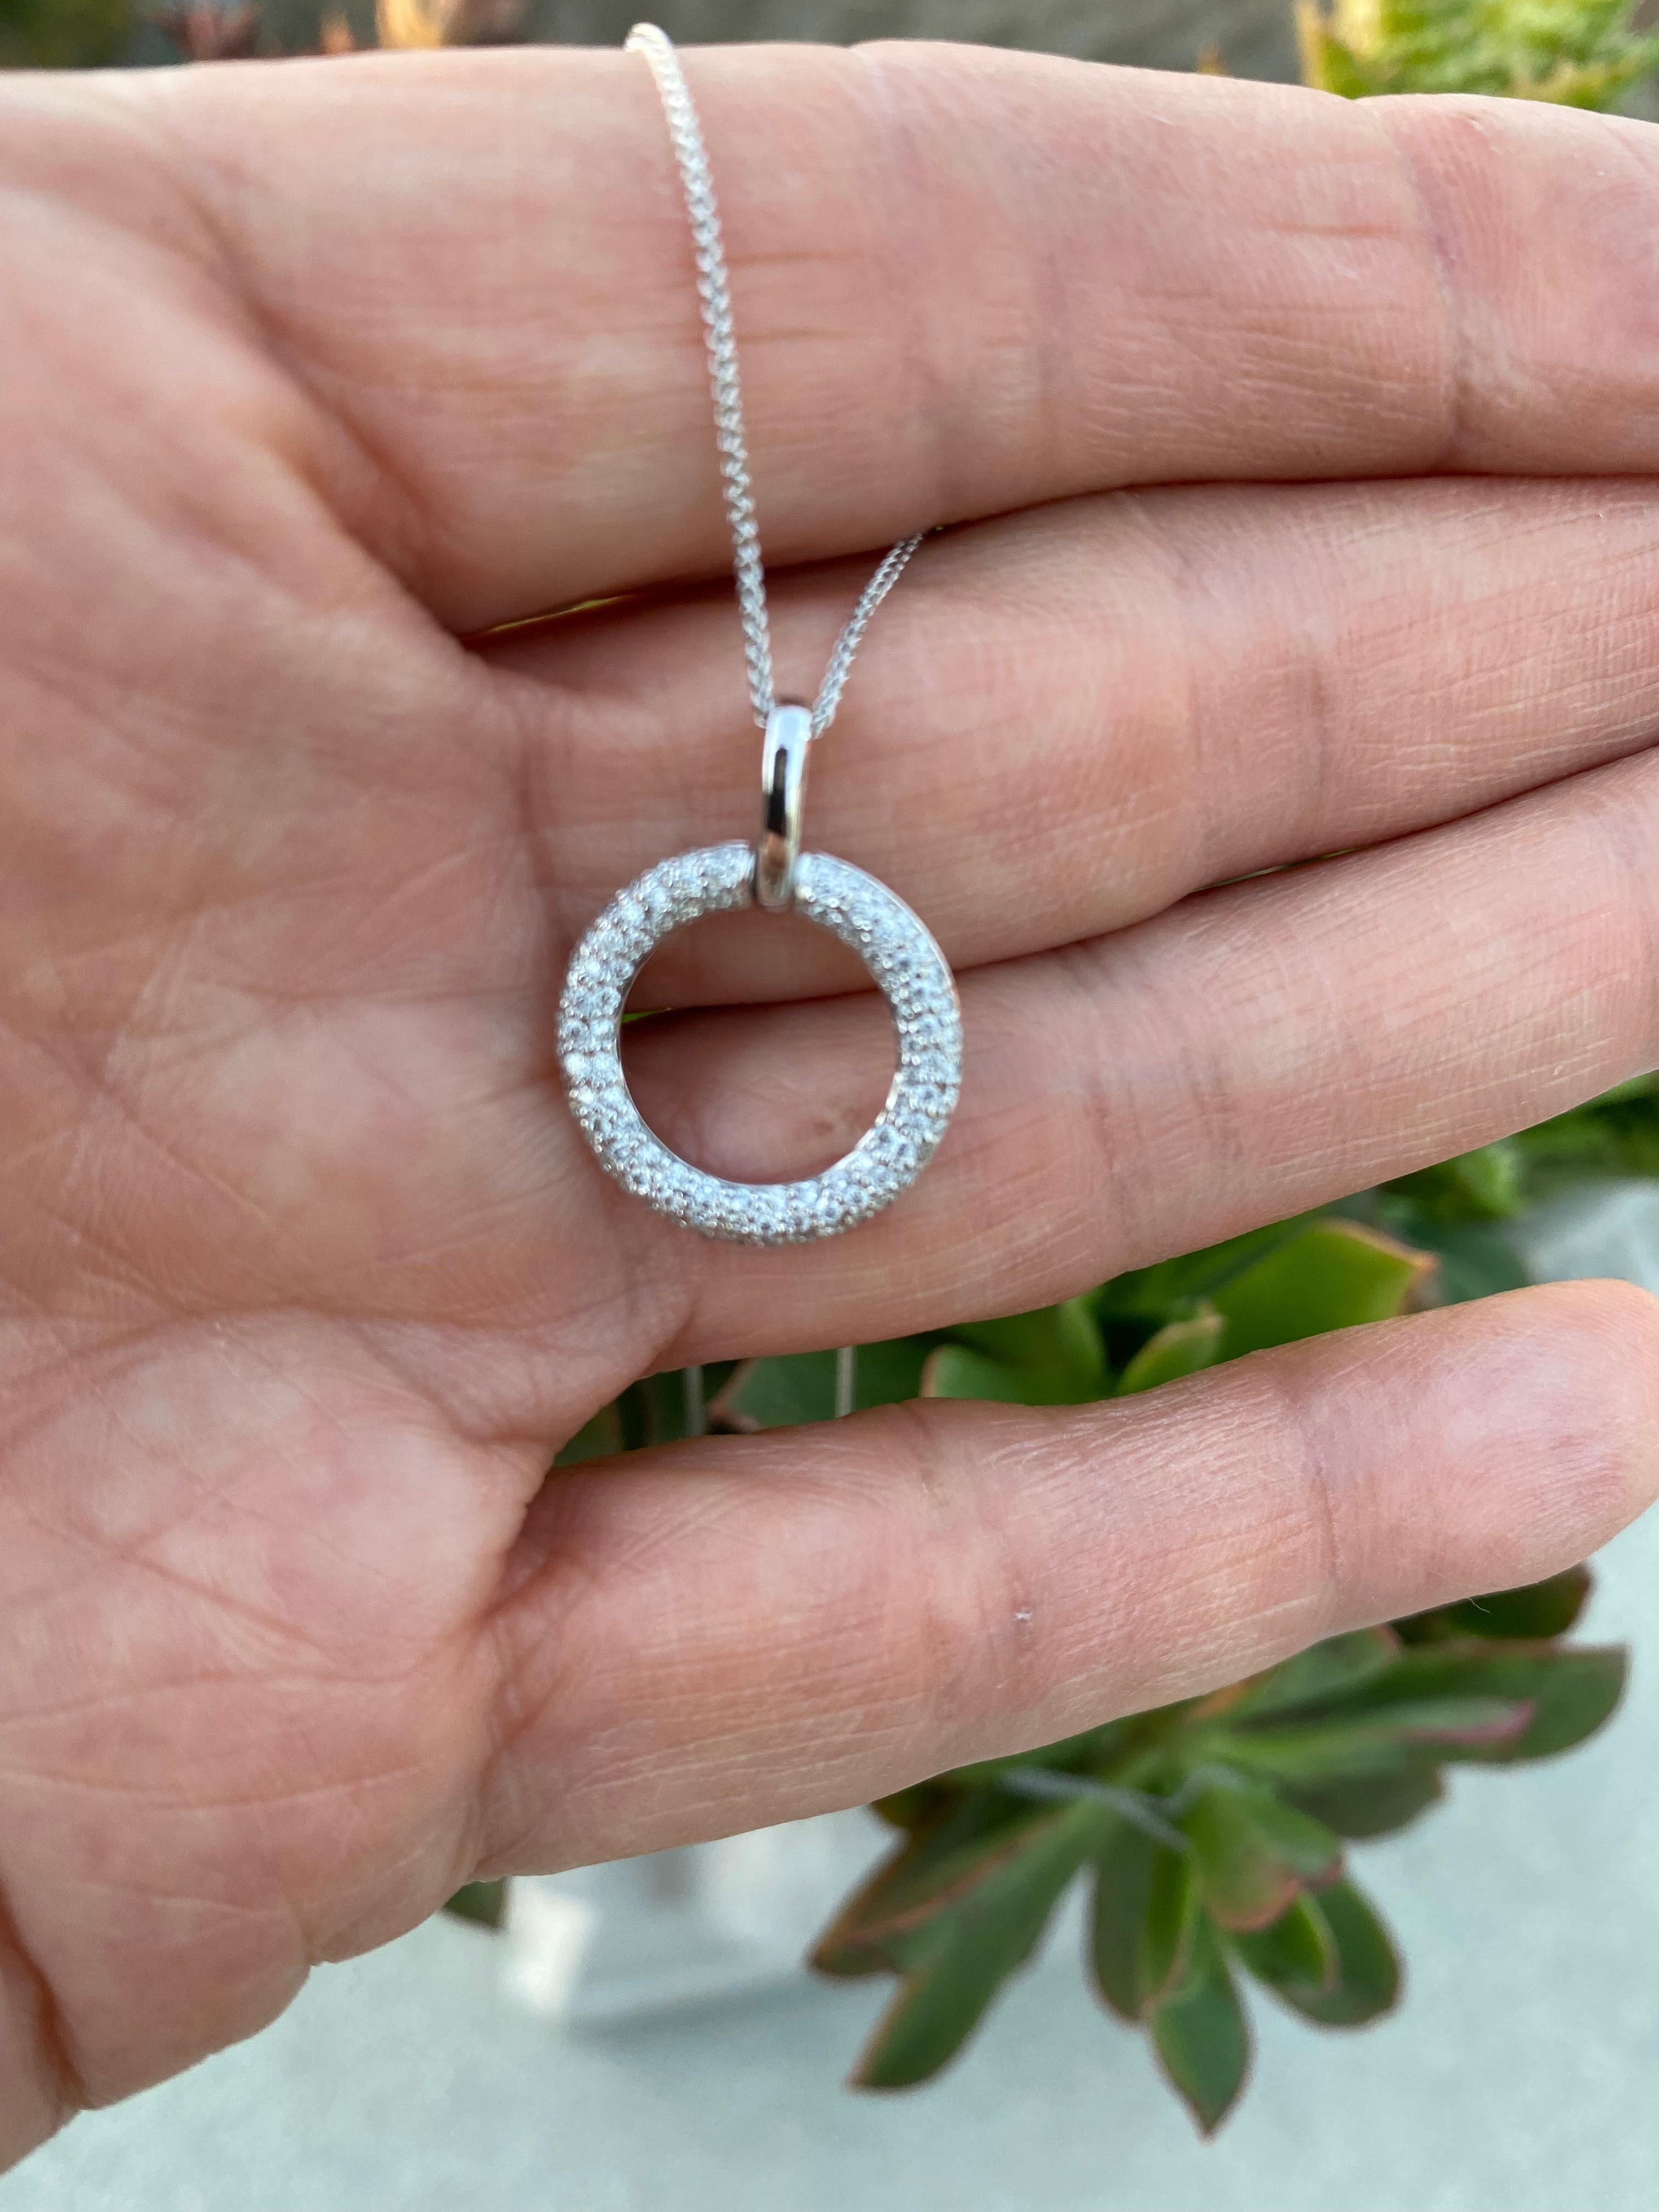 Halo Diamond Pendant VS-G Quality White Gold

The pendant is a half dome shape with 100 round micro-pave set diamonds 
The quality pendant is measuring .62